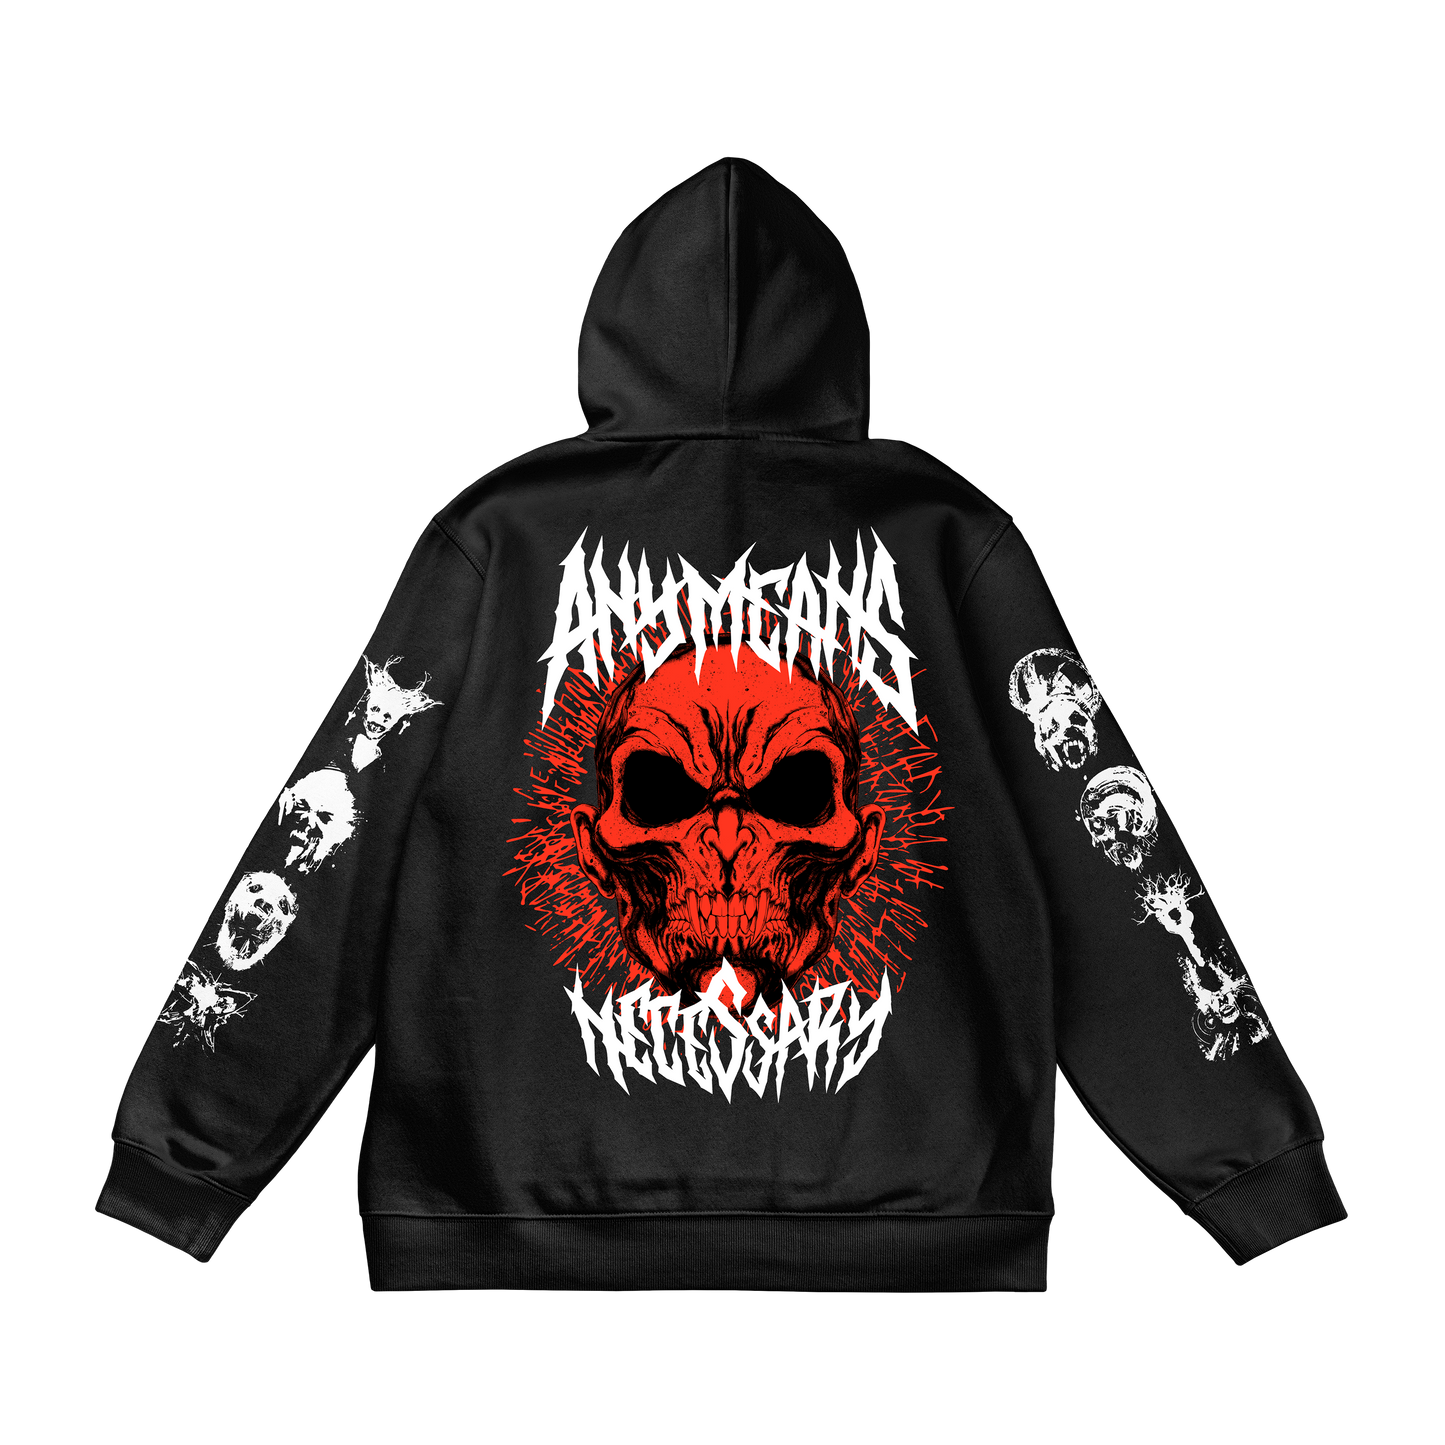 any means necessary shawn coss red fall game xbox microsoft bethesda studios vampire god pullover hoodie black BACK